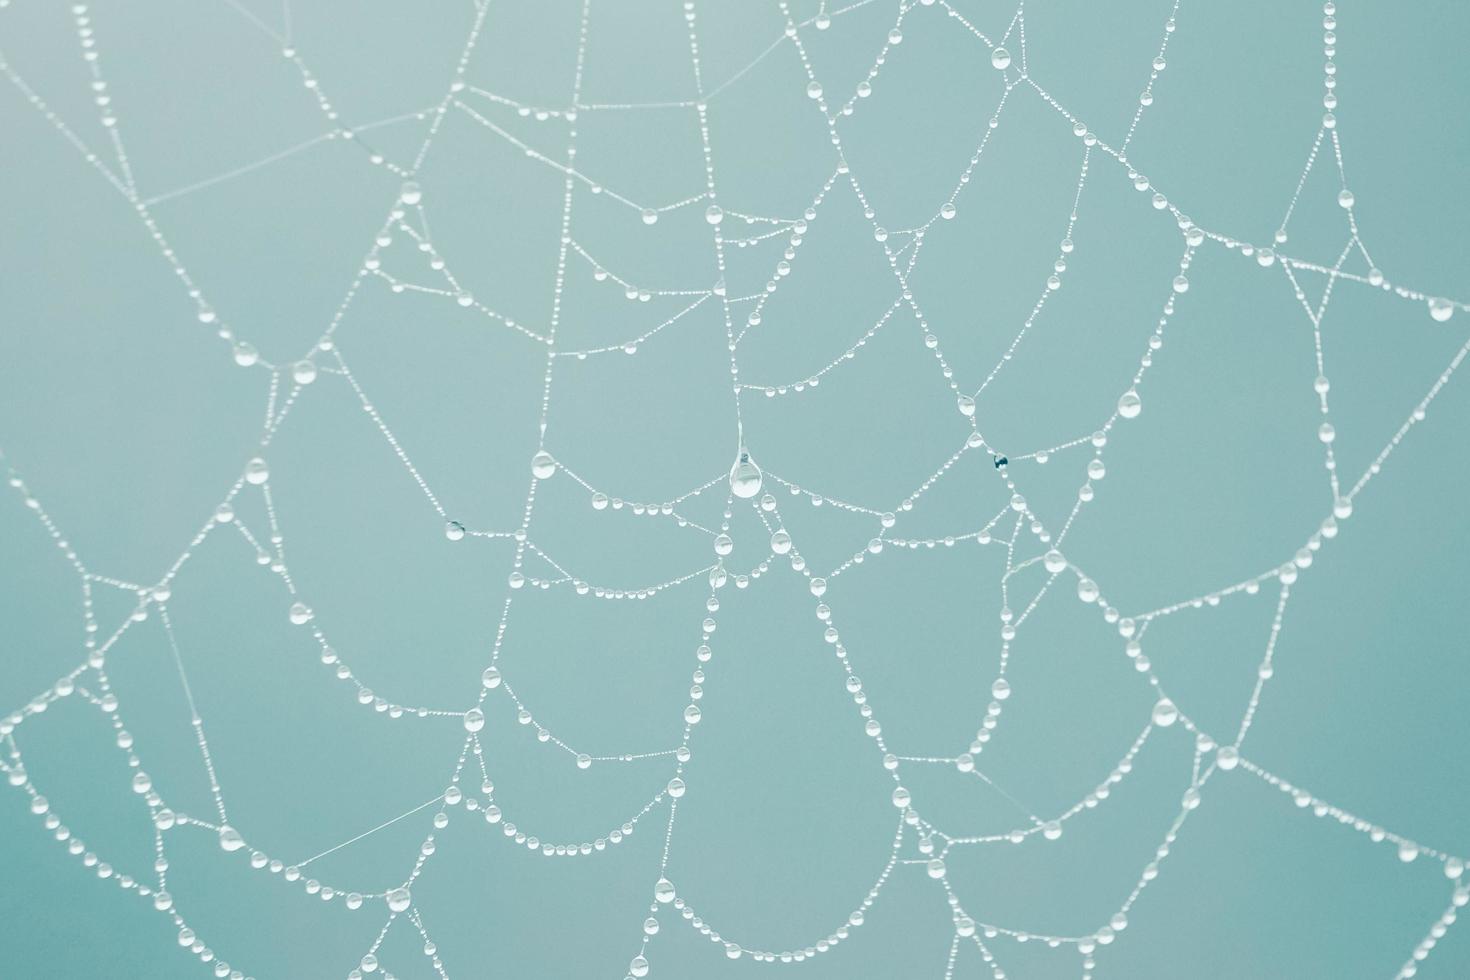 raindrops on the spider web in rainy days, blue background photo